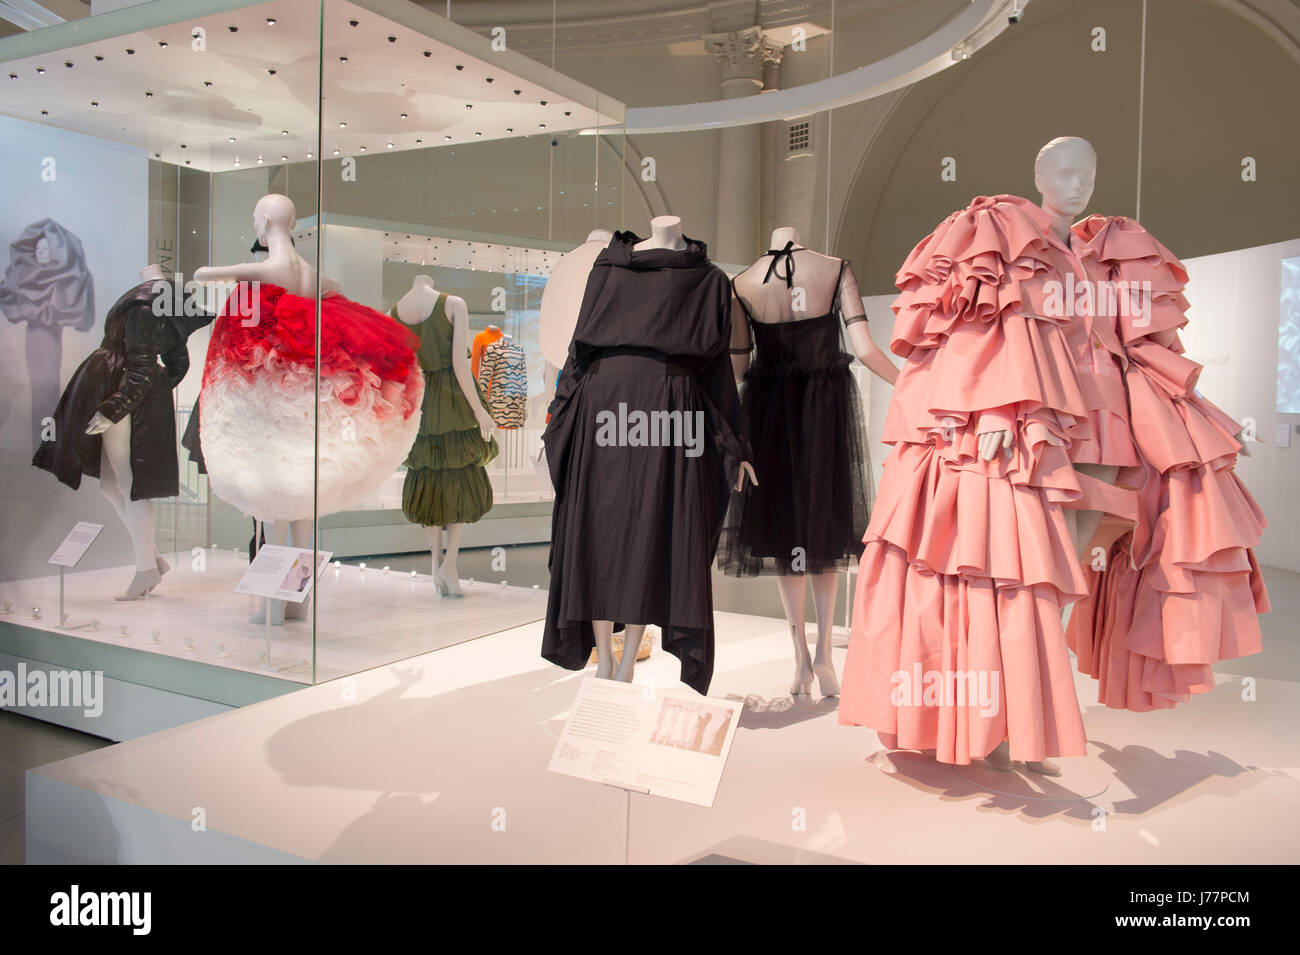 V&A, London, UK. 24th May, 2017. Balenciaga: Shaping Fashion. Exhibition  examining the work and legacy of Spanish couturier Cristóbal Balenciaga,  with over 100 pieces crafted by 'the master' of couture, his protégées